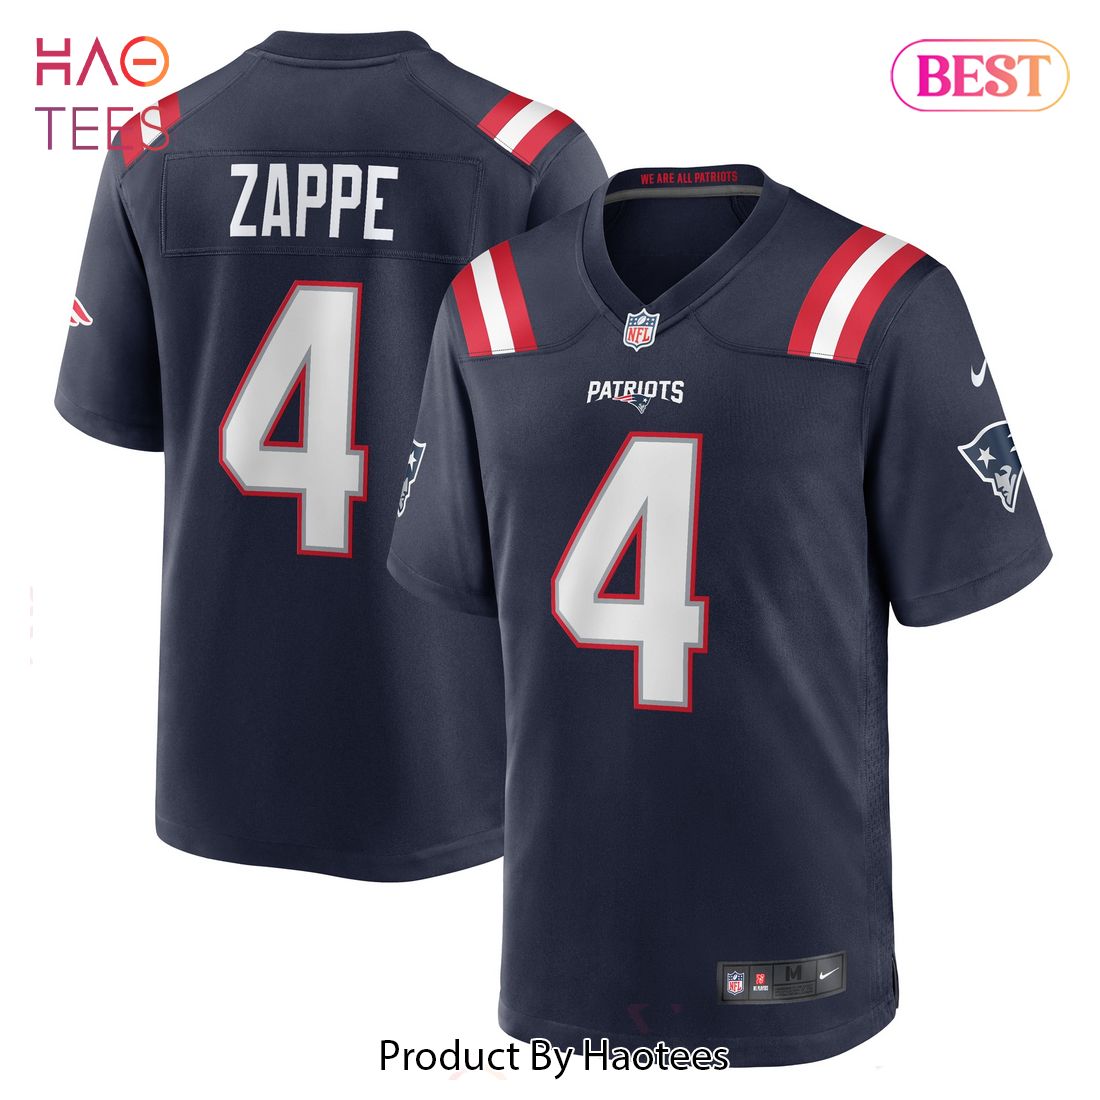 Bailey Zappe New England Patriots Nike Game Player Jersey Navy